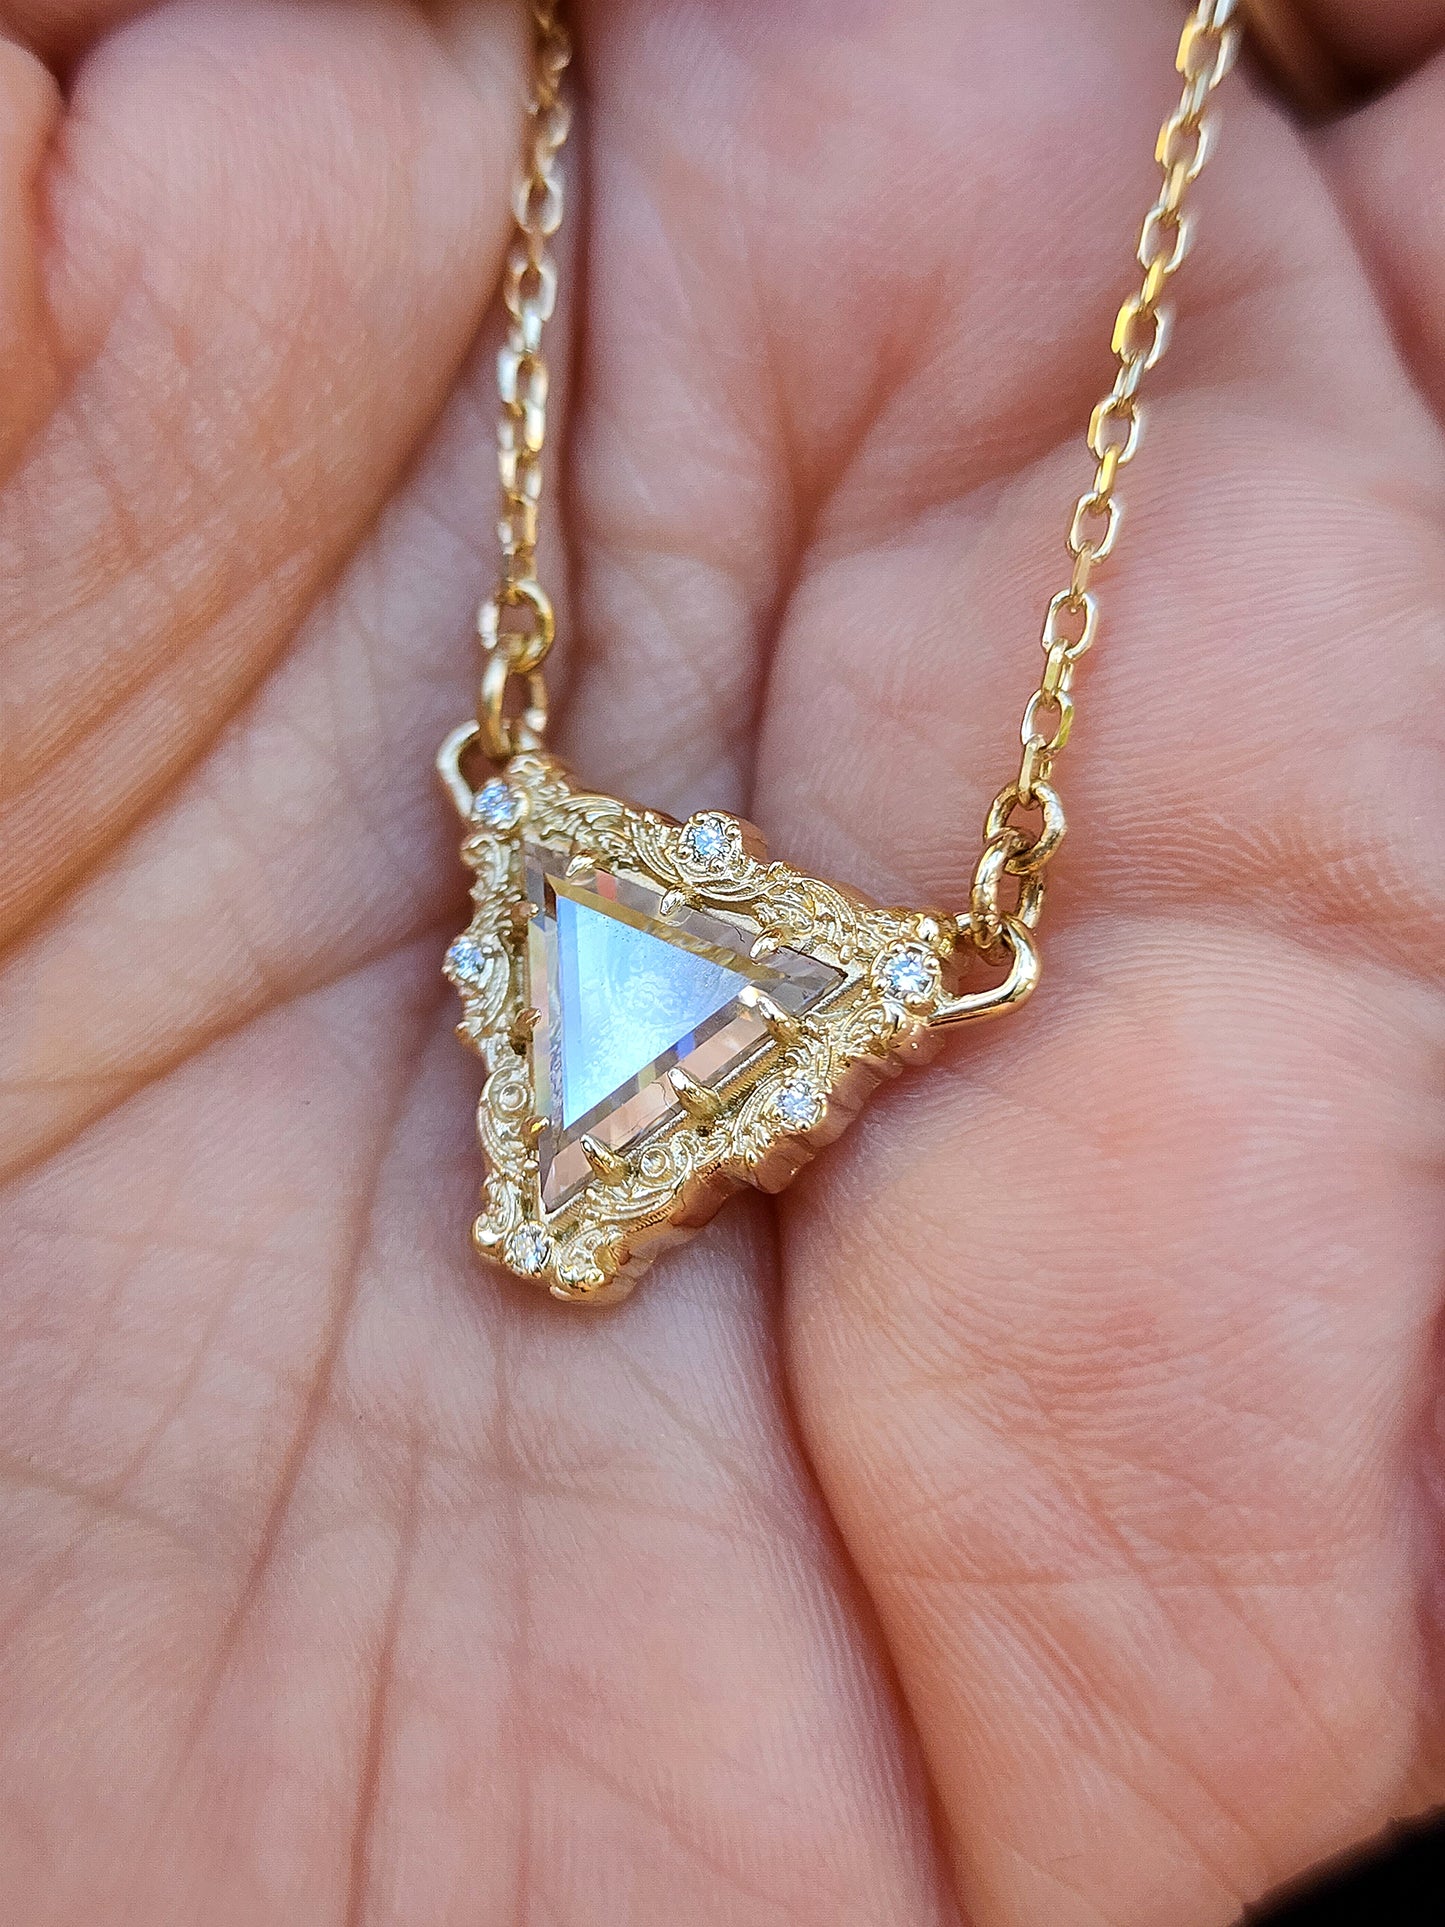 Load image into Gallery viewer, Vampire Bat Pendant with Triangle Moissanite Window Pane and Baroque Gold Frame on Star Chain 14k Yellow Gold
